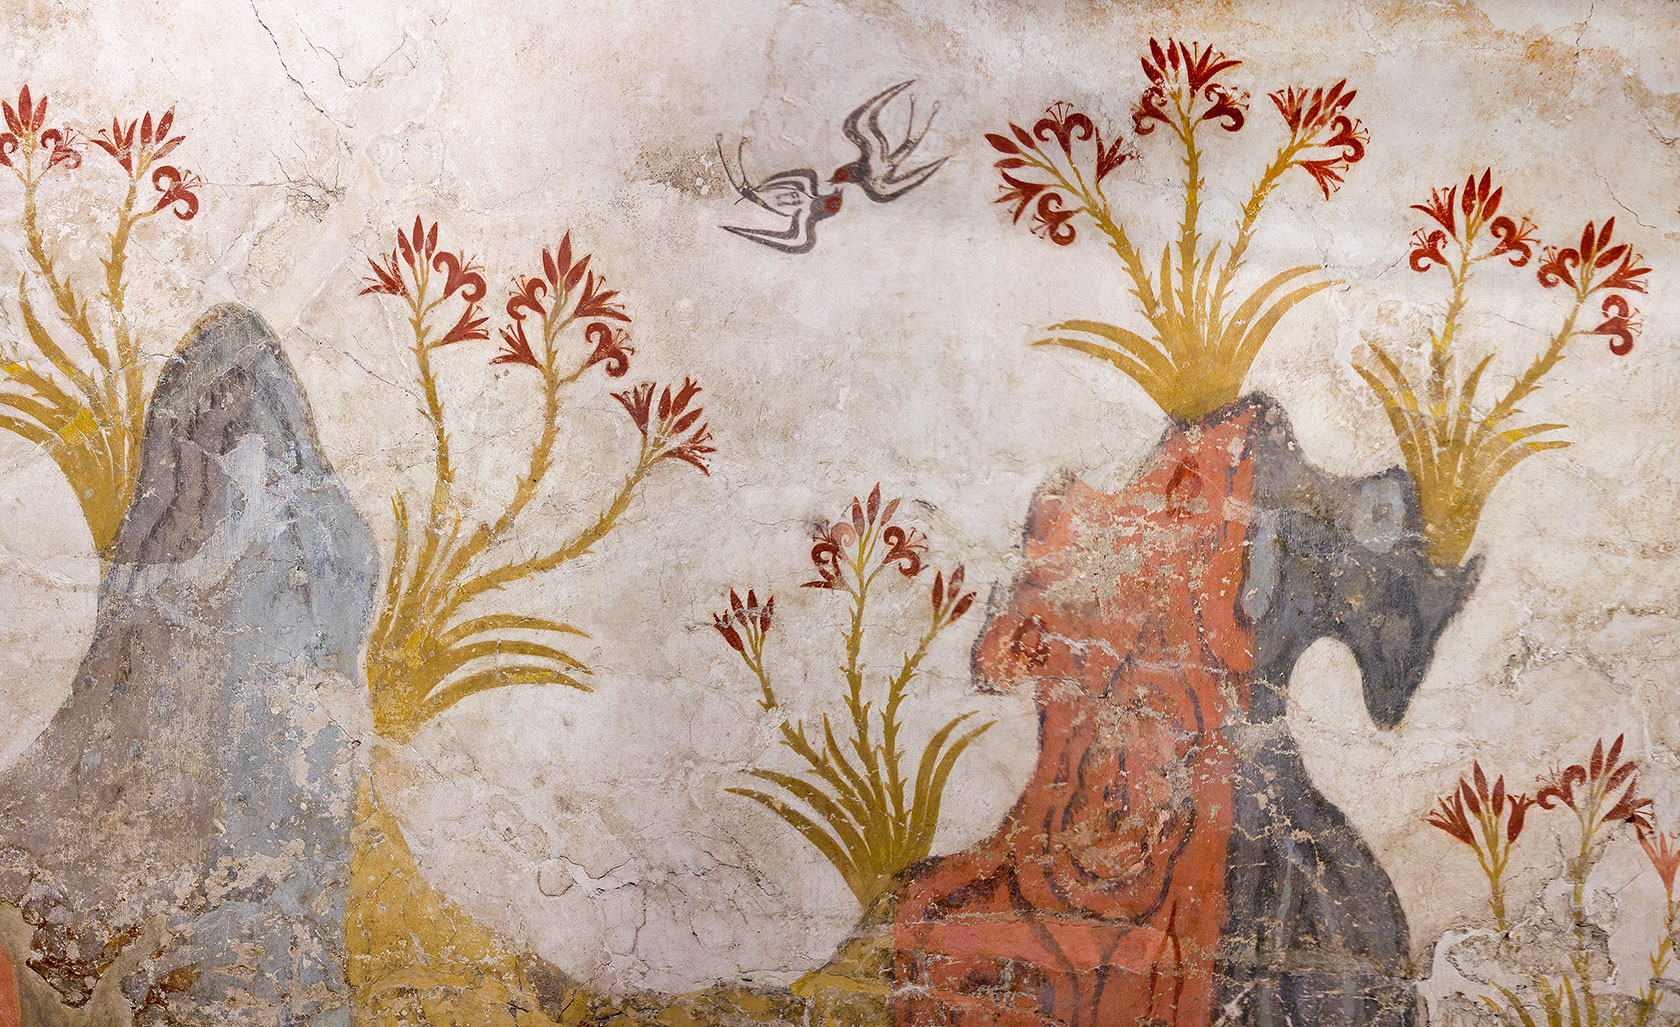 Springtime colorful fresco with trees, lilies flowers and swallows from Akrotiri Minoan Bronze Age settlement on the volcanic Greek island of Santorini.